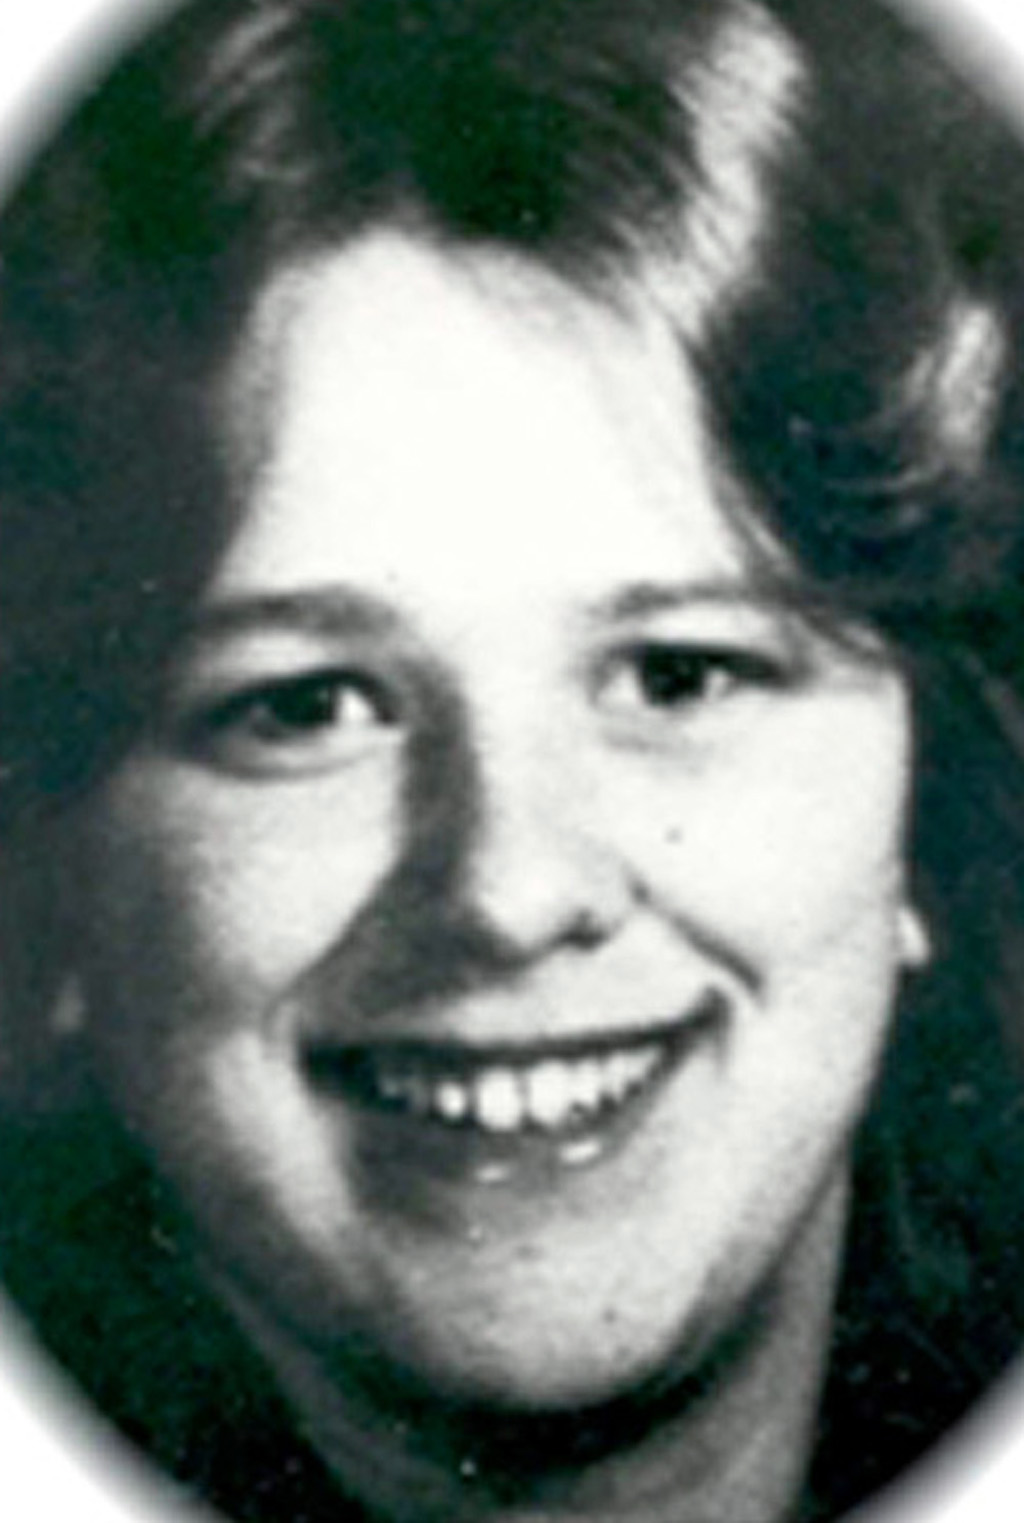 Boys discover body of Green River killer victim Wendy Lee Coffield, age 16,  on July 15, 1982. 